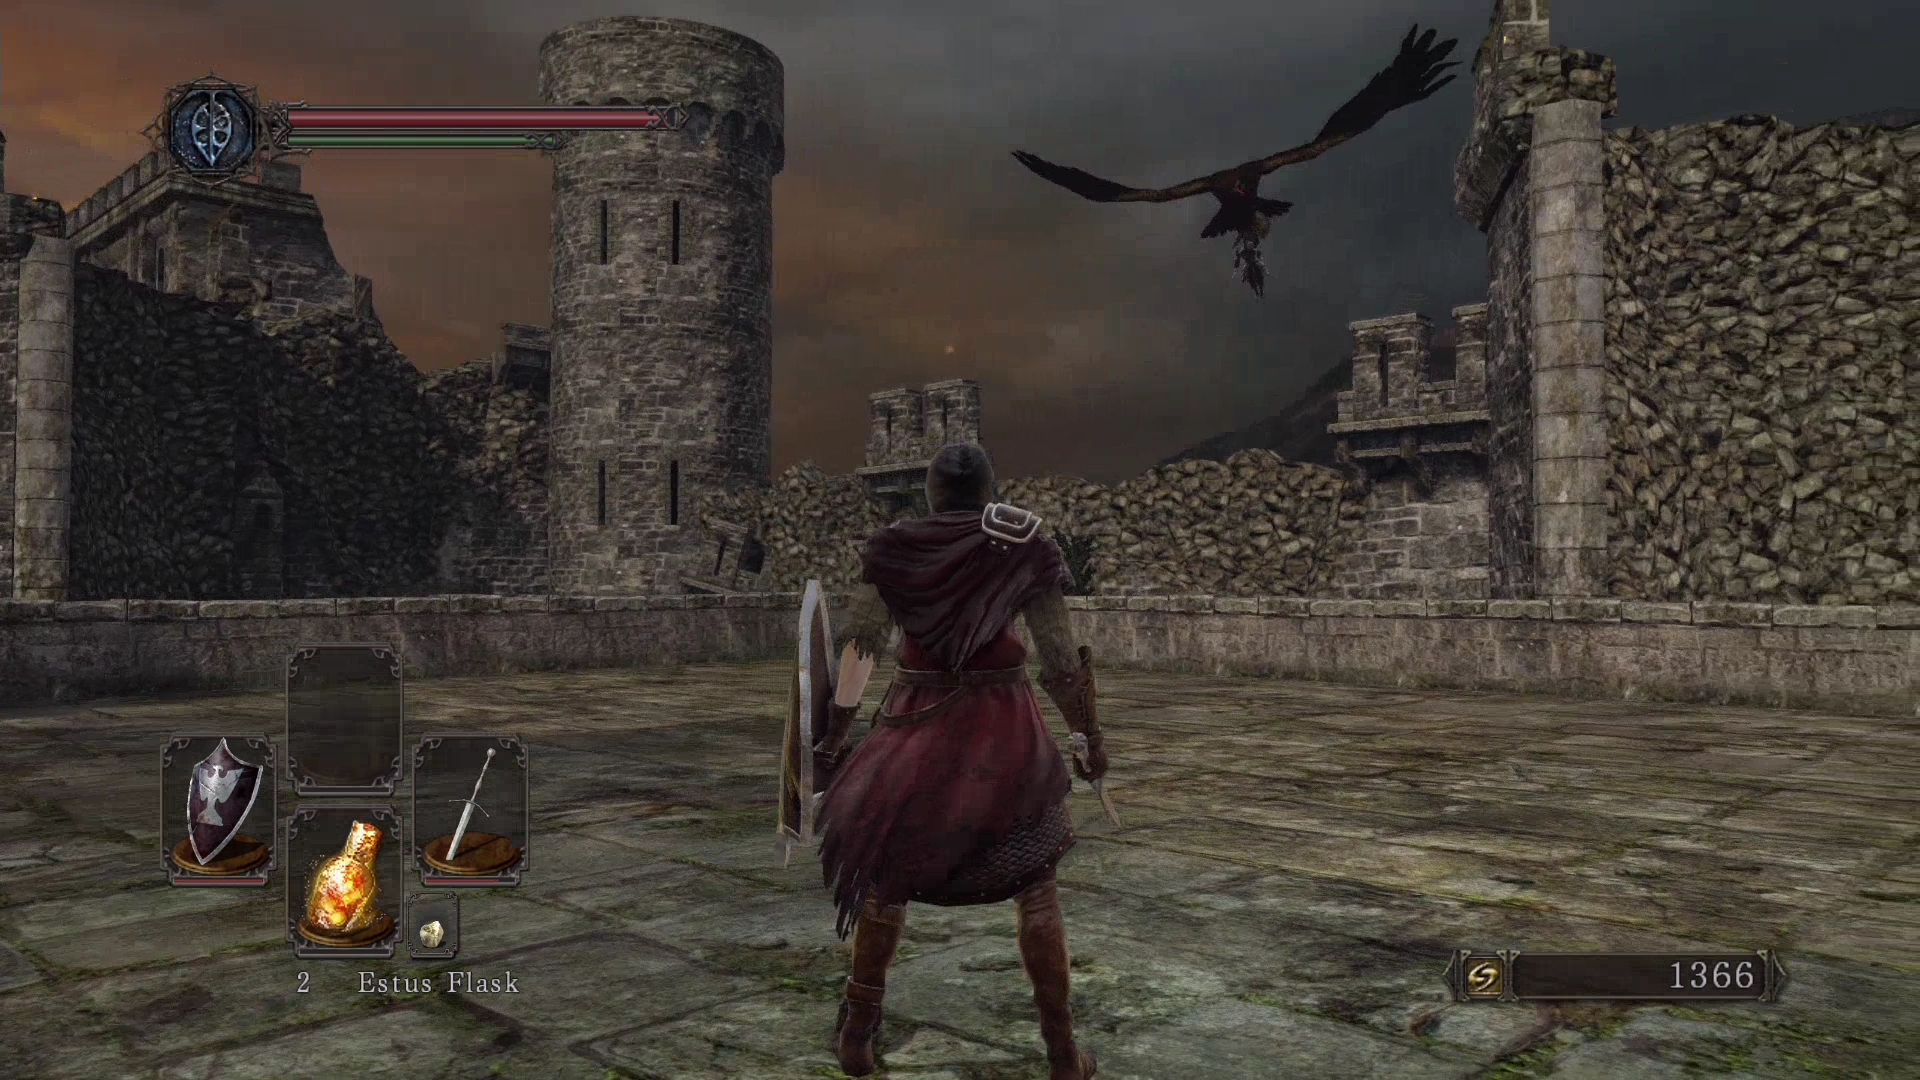 Dark Souls 2 is Kind of Disappointing